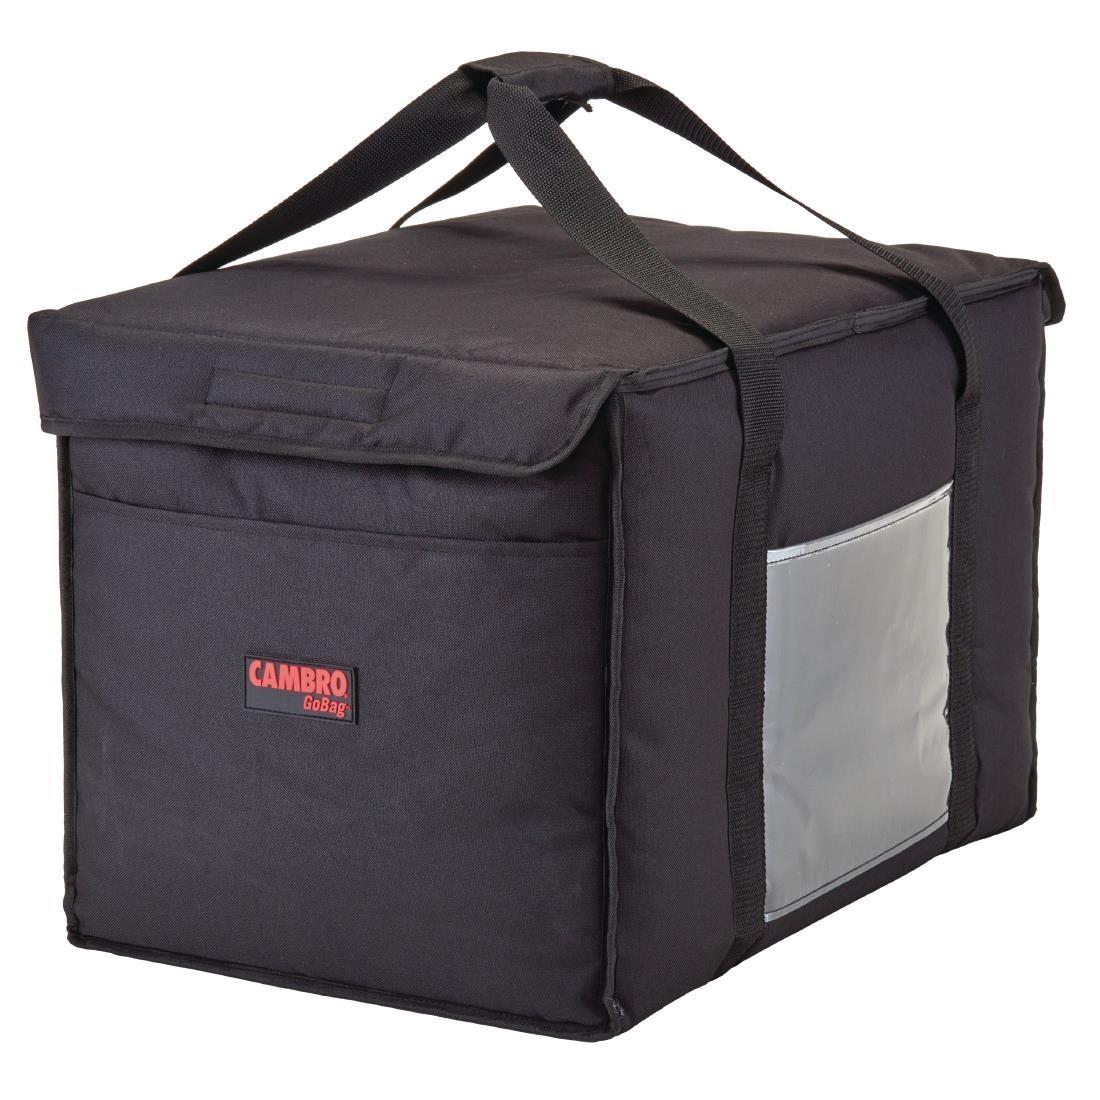 Cambro Top Loading GoBag Delivery Bag Large - FB274  - 2